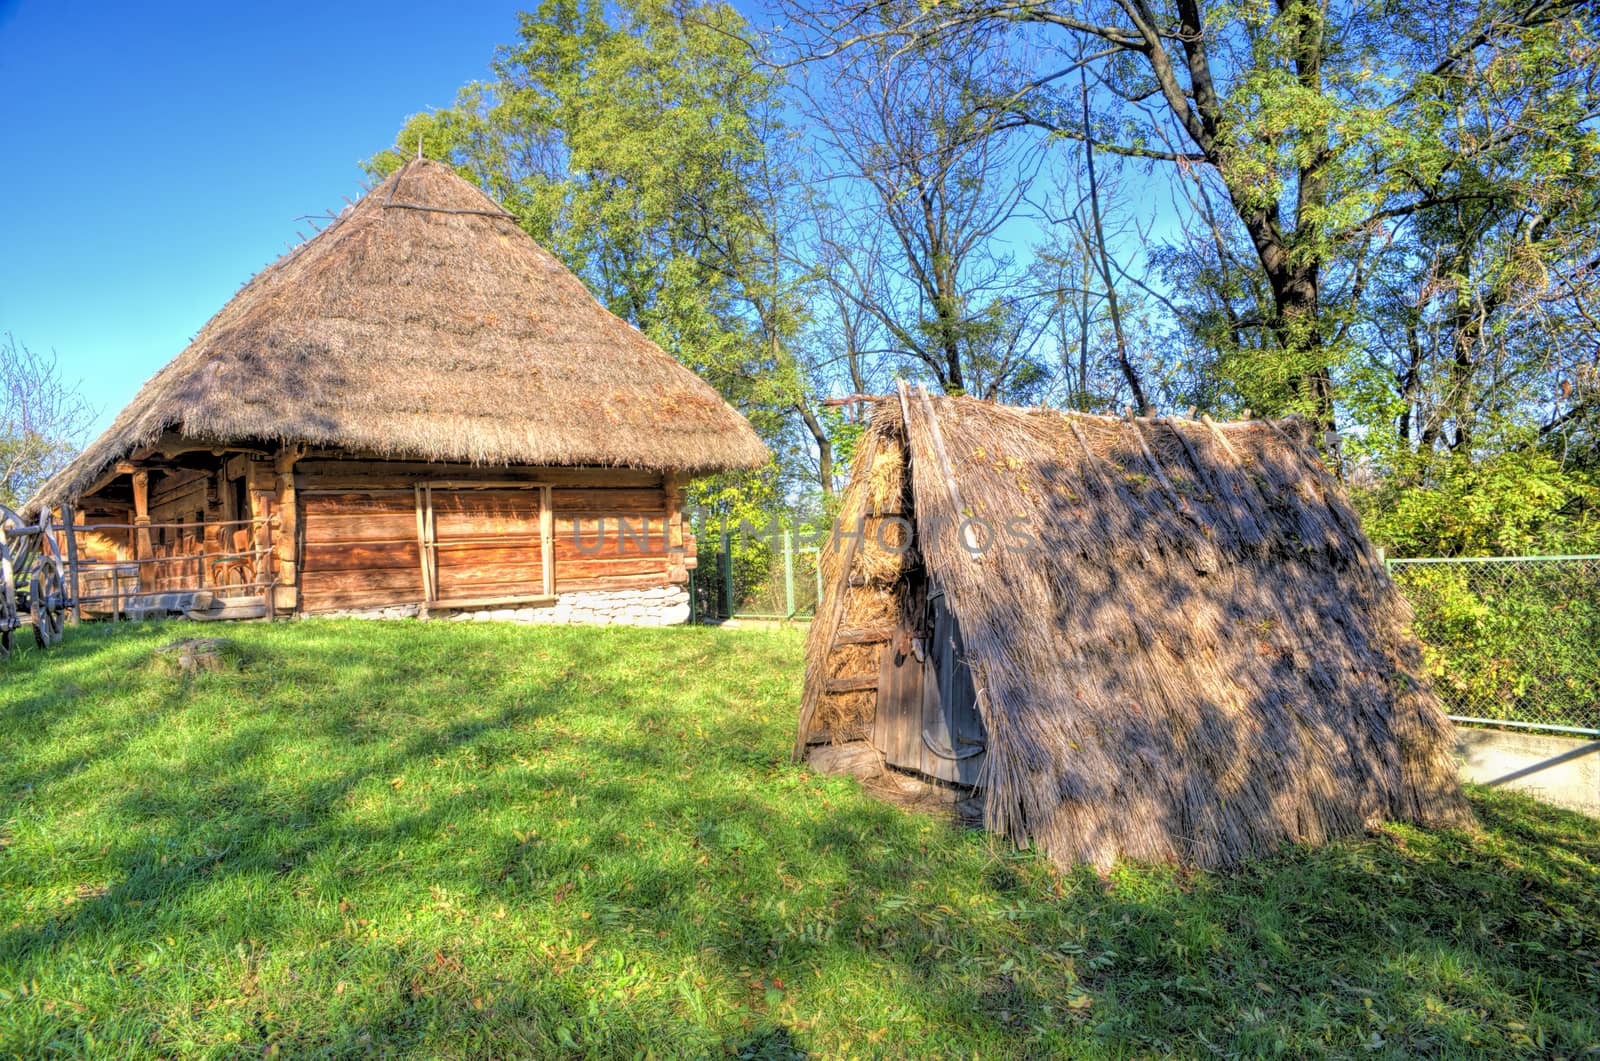 Thatched cellar for agricultural products in the farmhouse courtyard of a wooden house